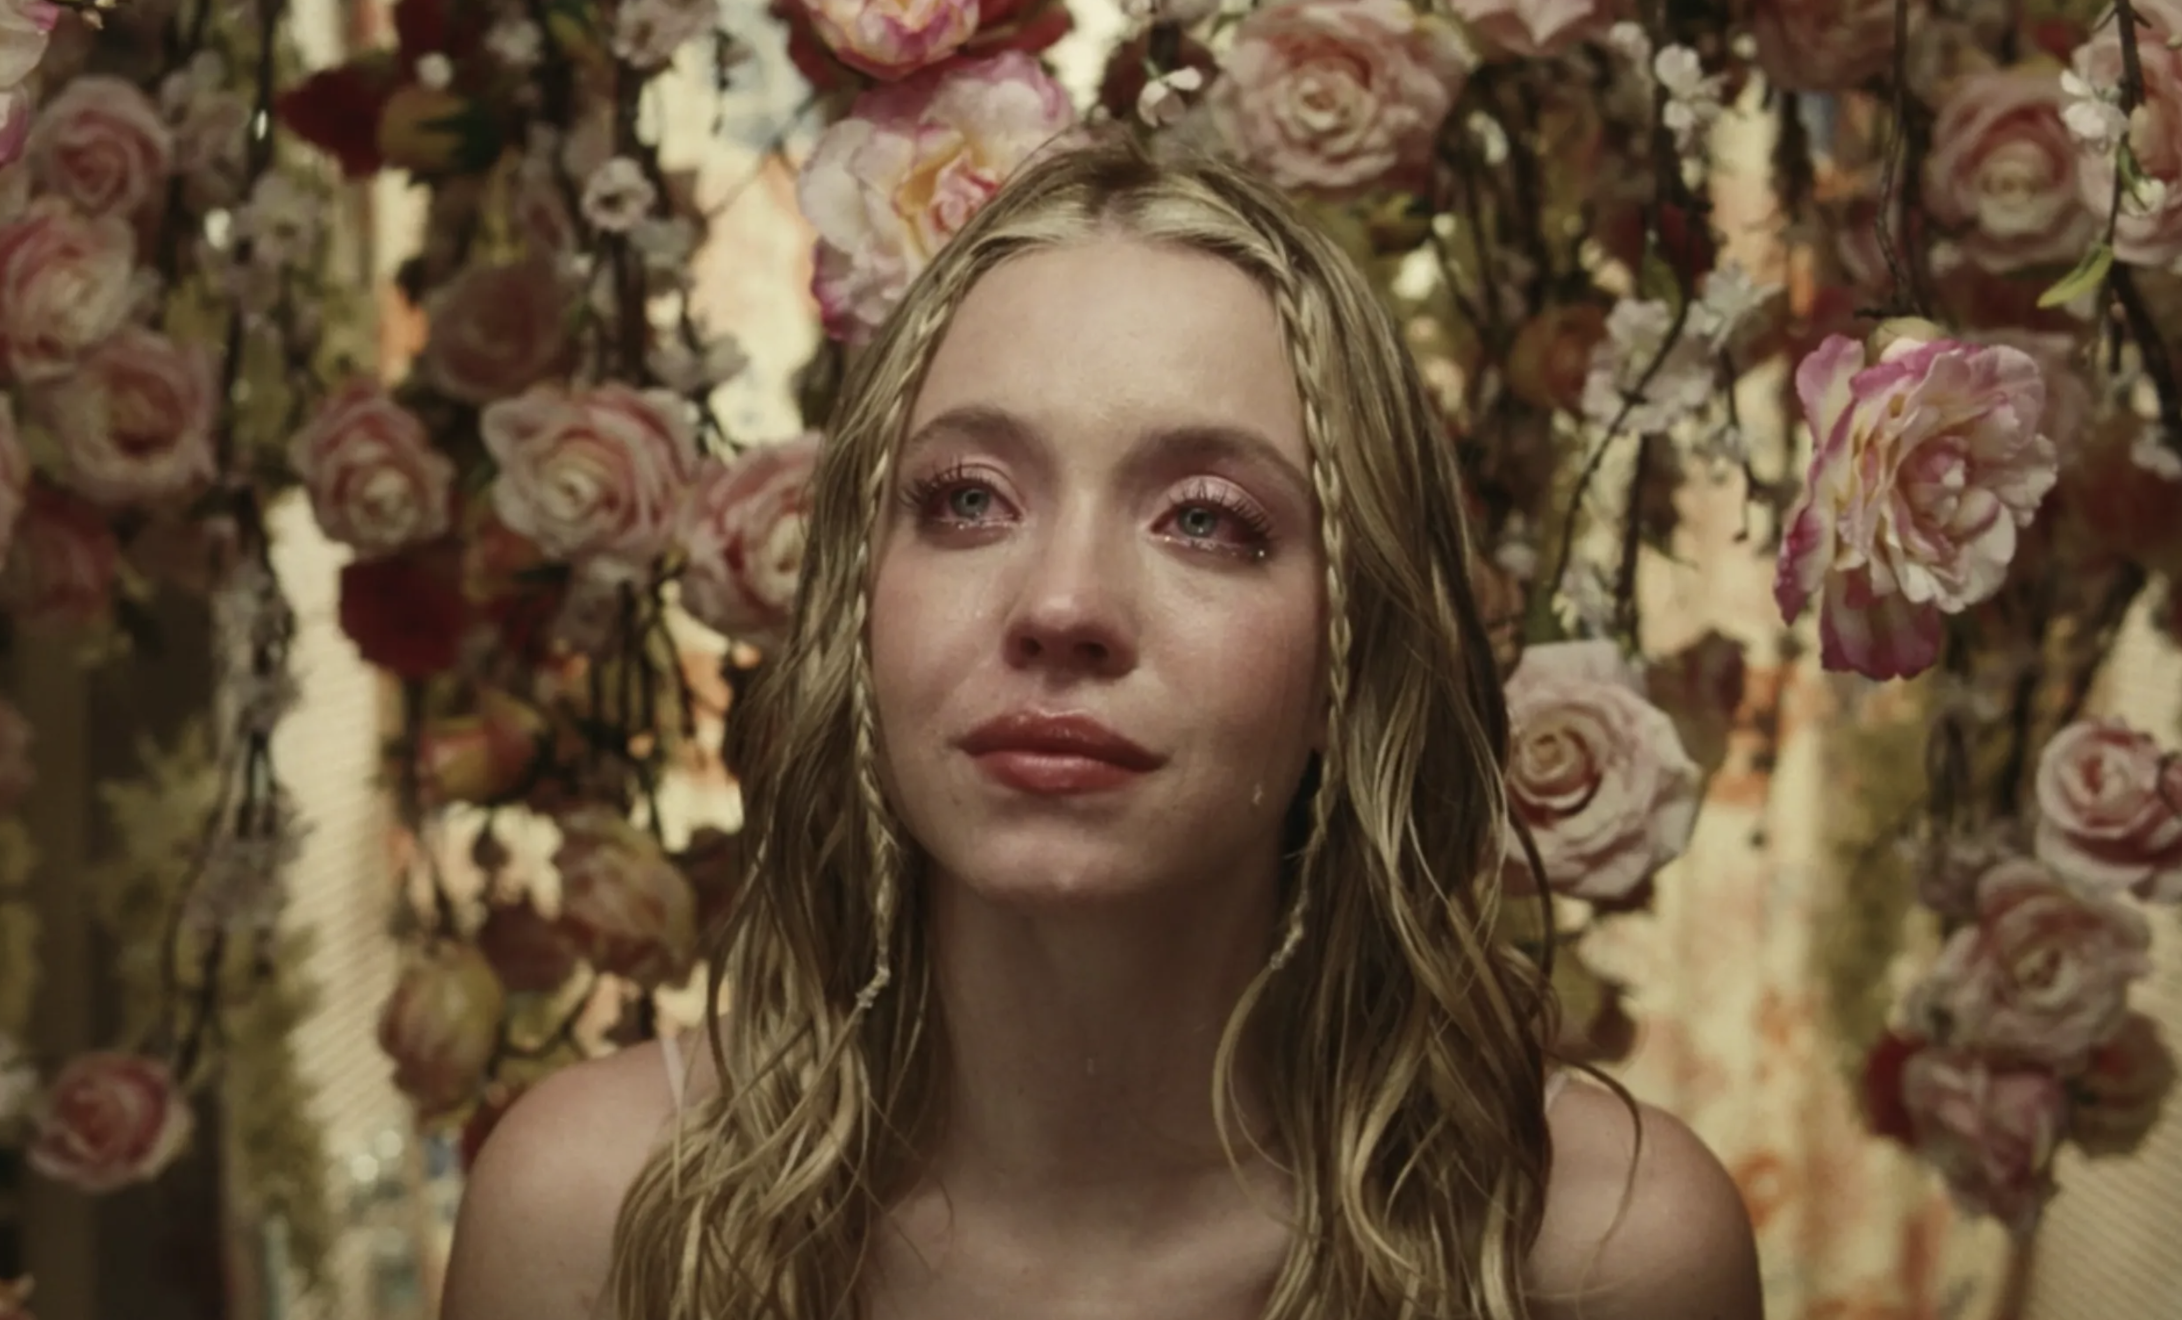 Sydney Sweeney is disappointed with her Euphoria salary